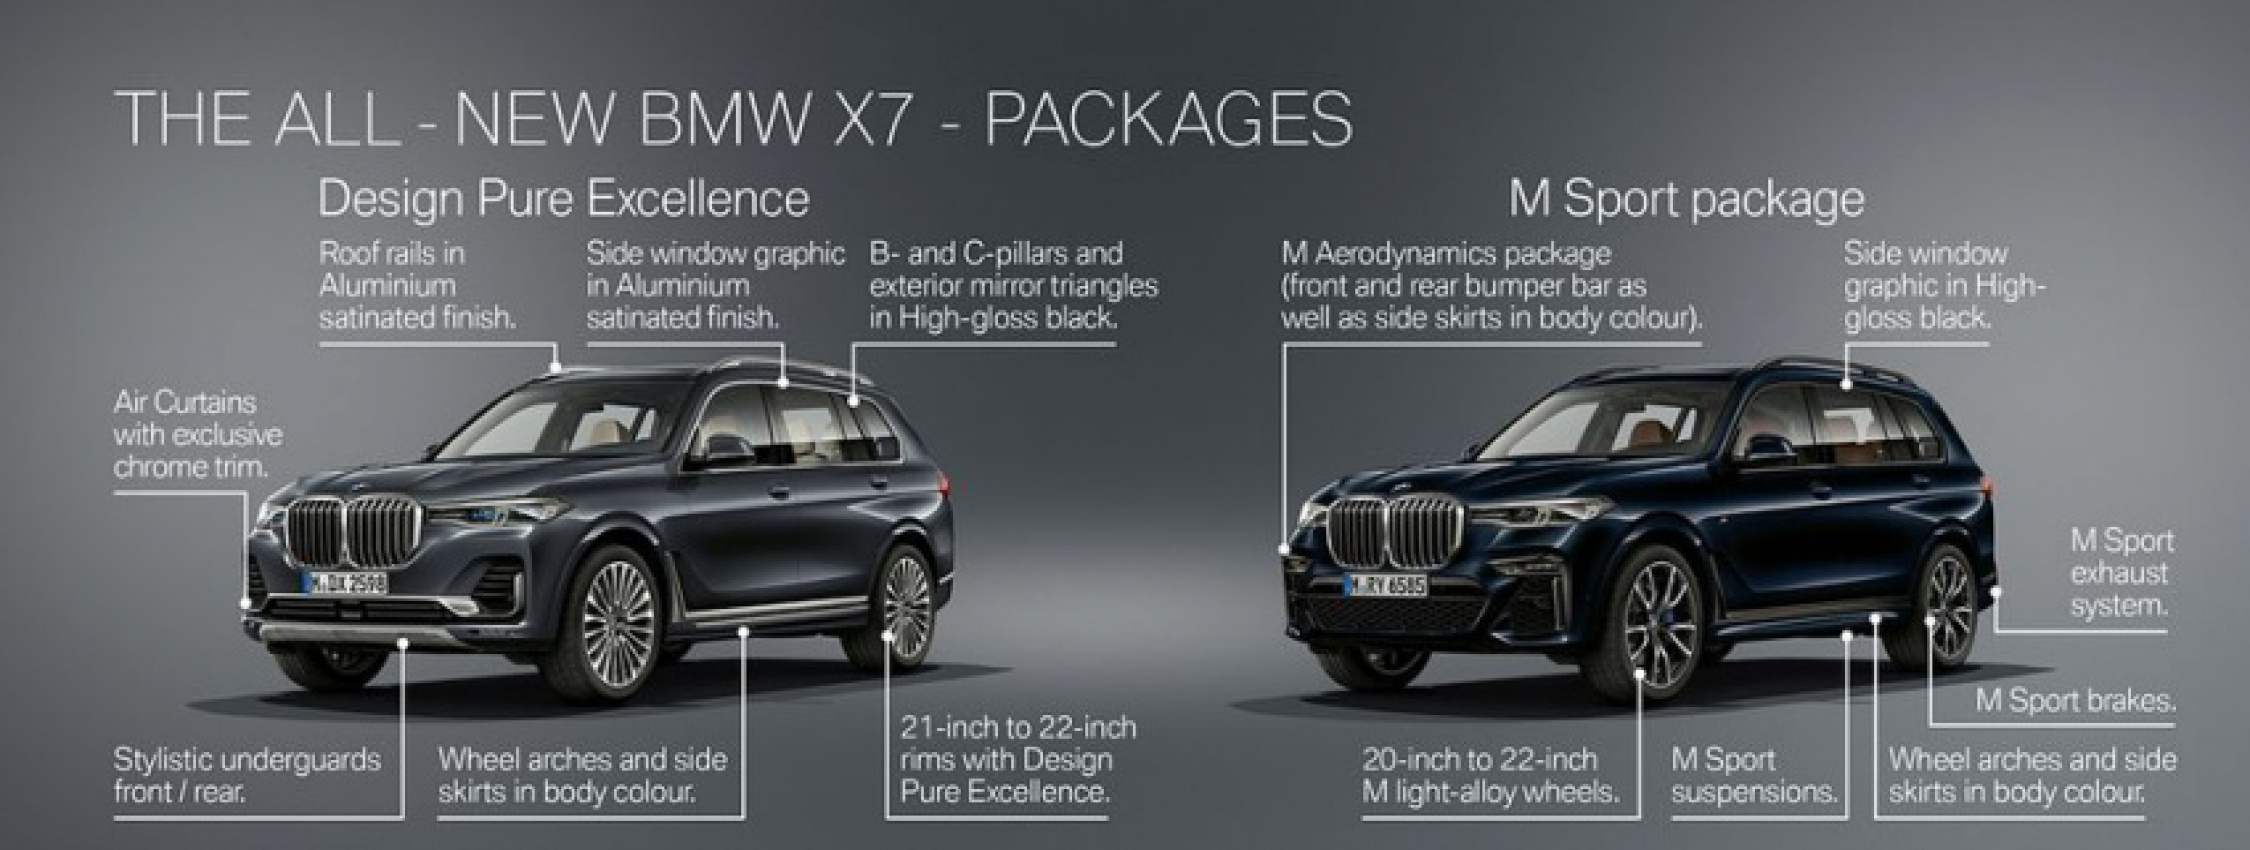 autos, bmw, cars, auto news, bmw x7, x7, all-new 2019 g07 bmw x7 unveiled, available with m performance and 760 nm of torque